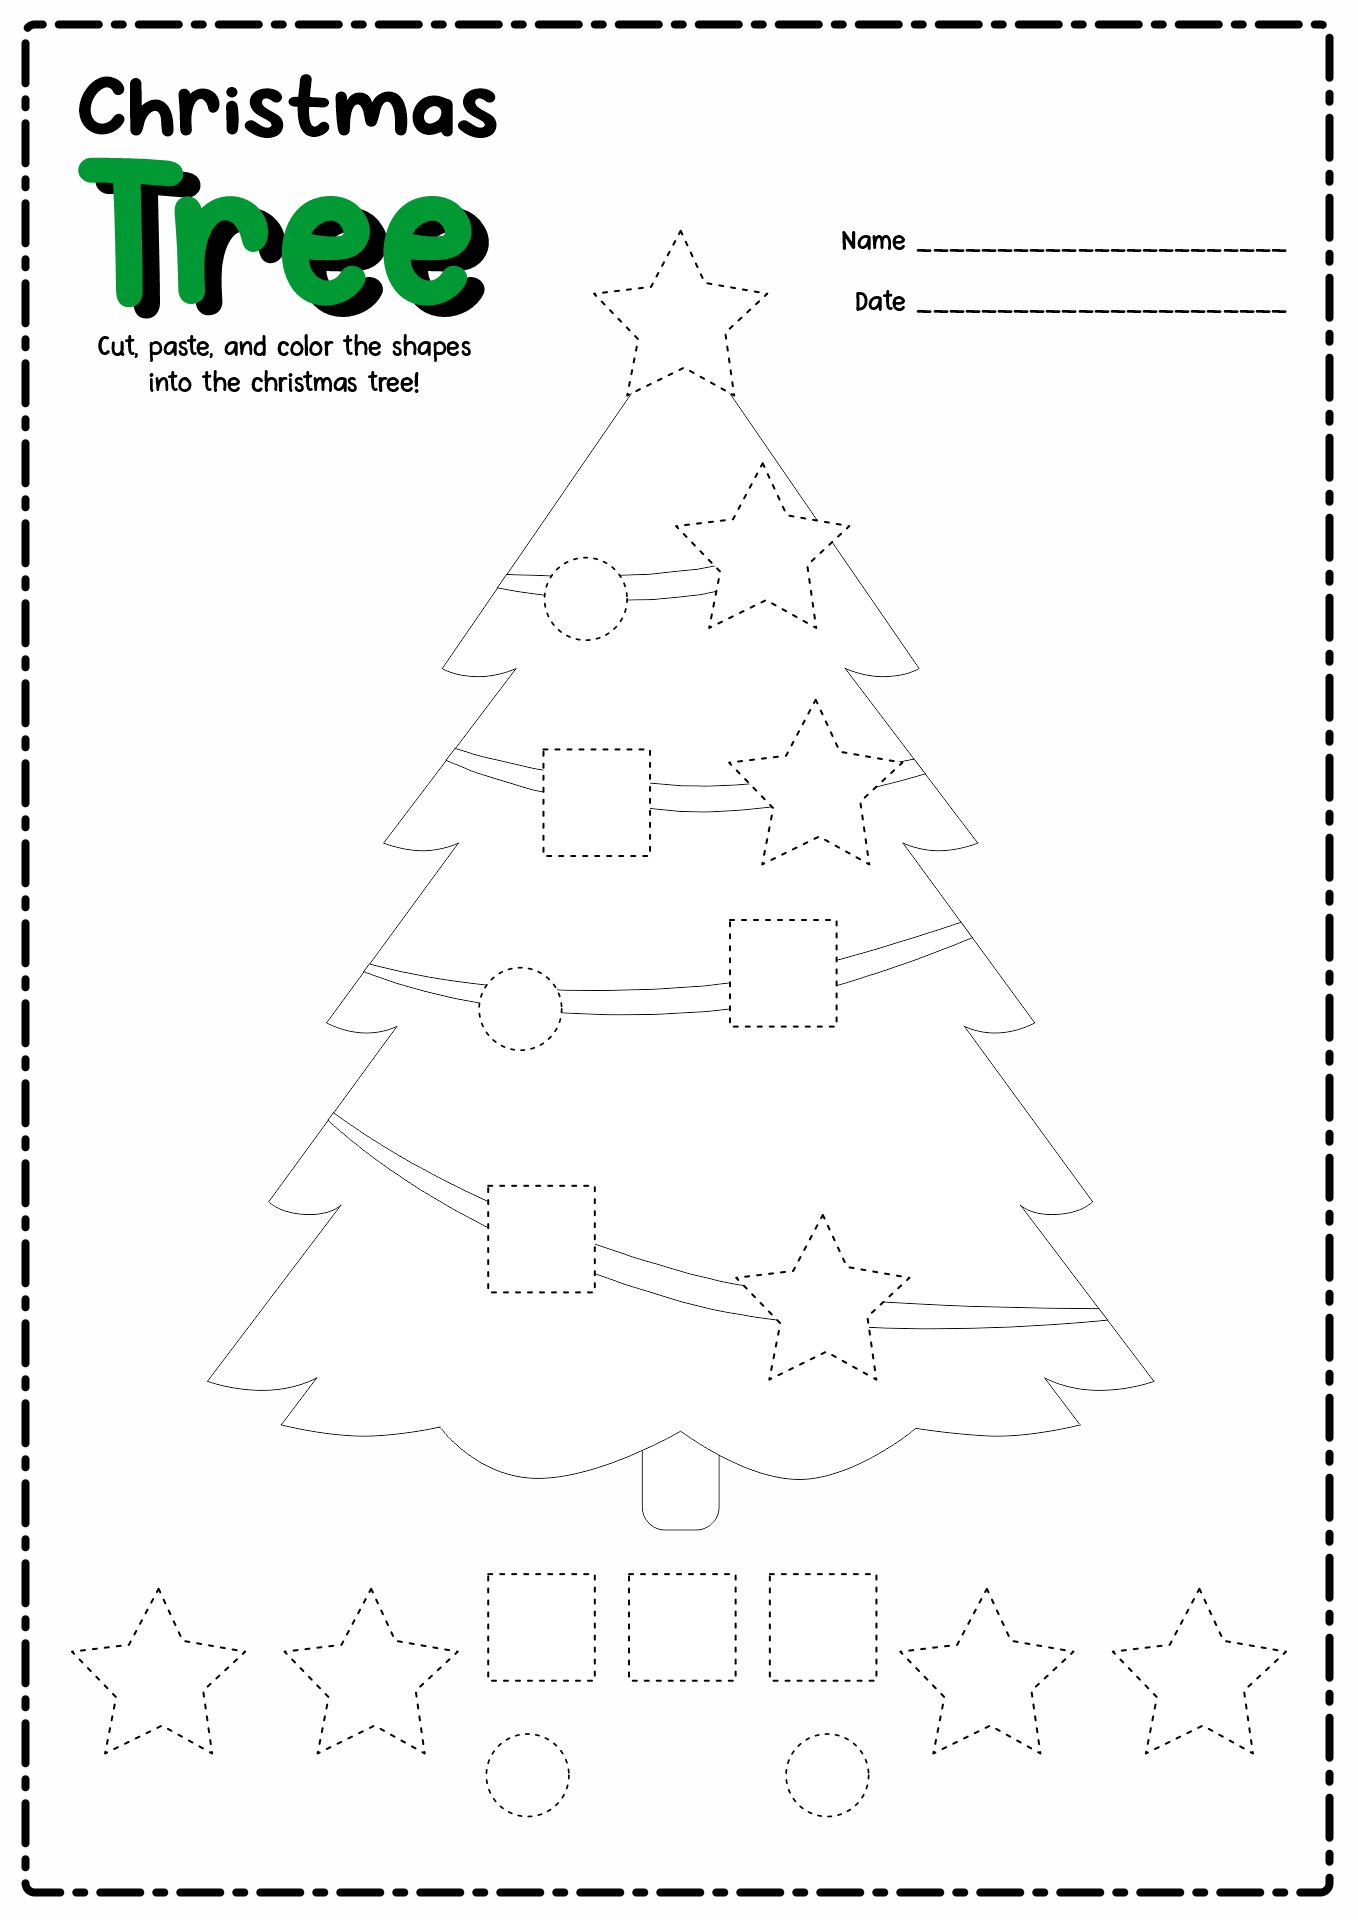 Christmas Tree Cut and Paste Activity